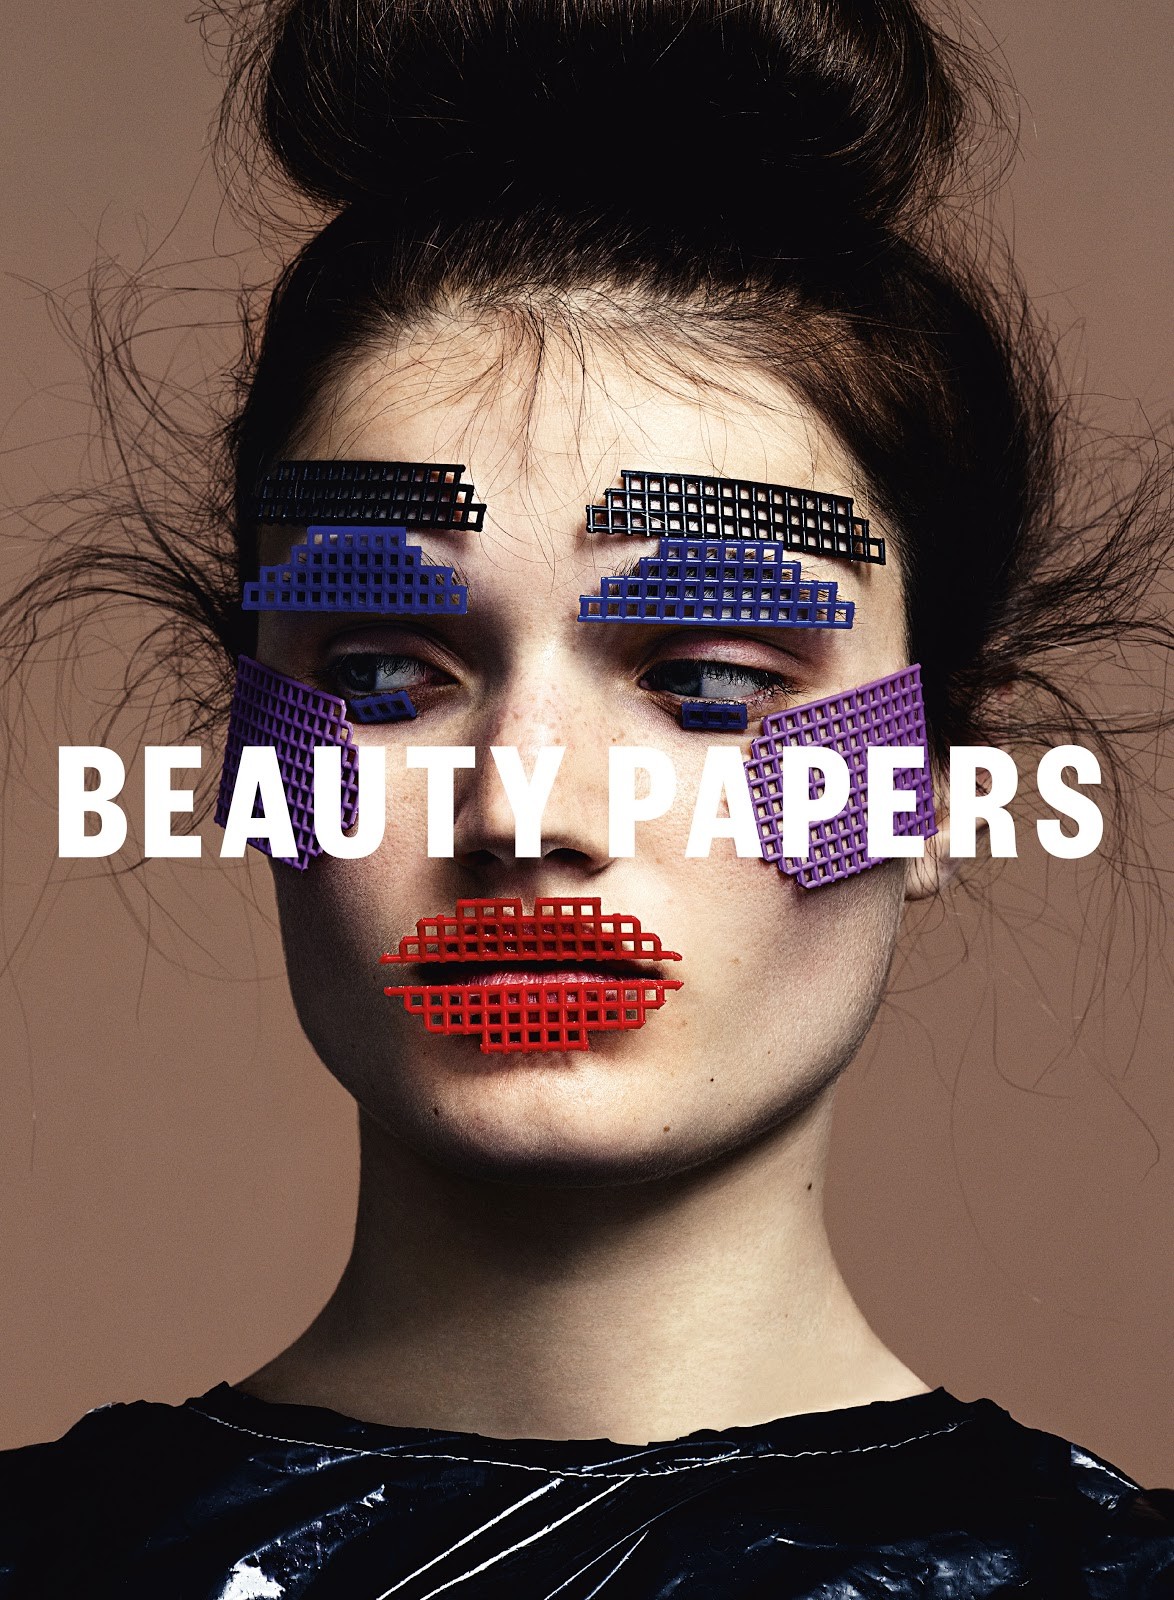 Beauty Papers